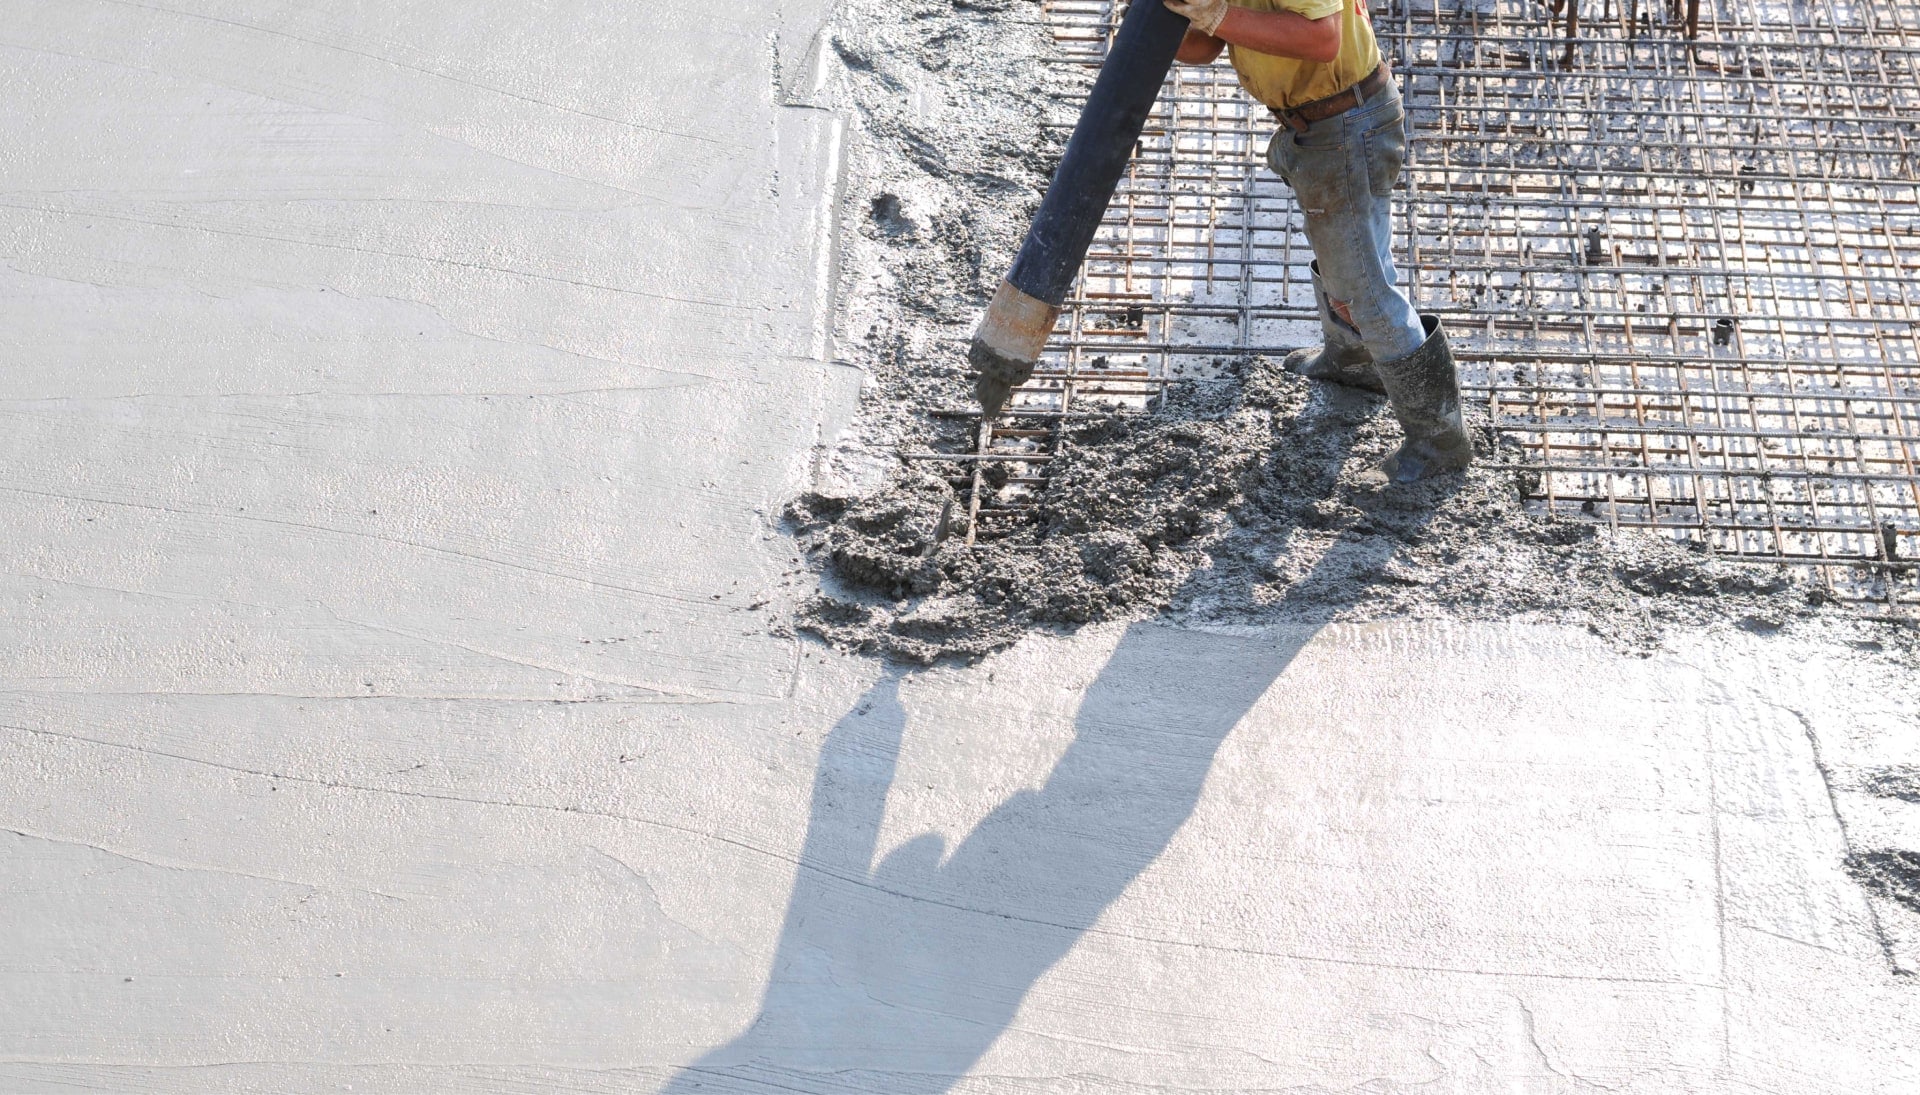 High-Quality Concrete Foundation Services San Bernardino, CA Trust Experienced Contractors for Strong Concrete Foundations for Residential or Commercial Projects.